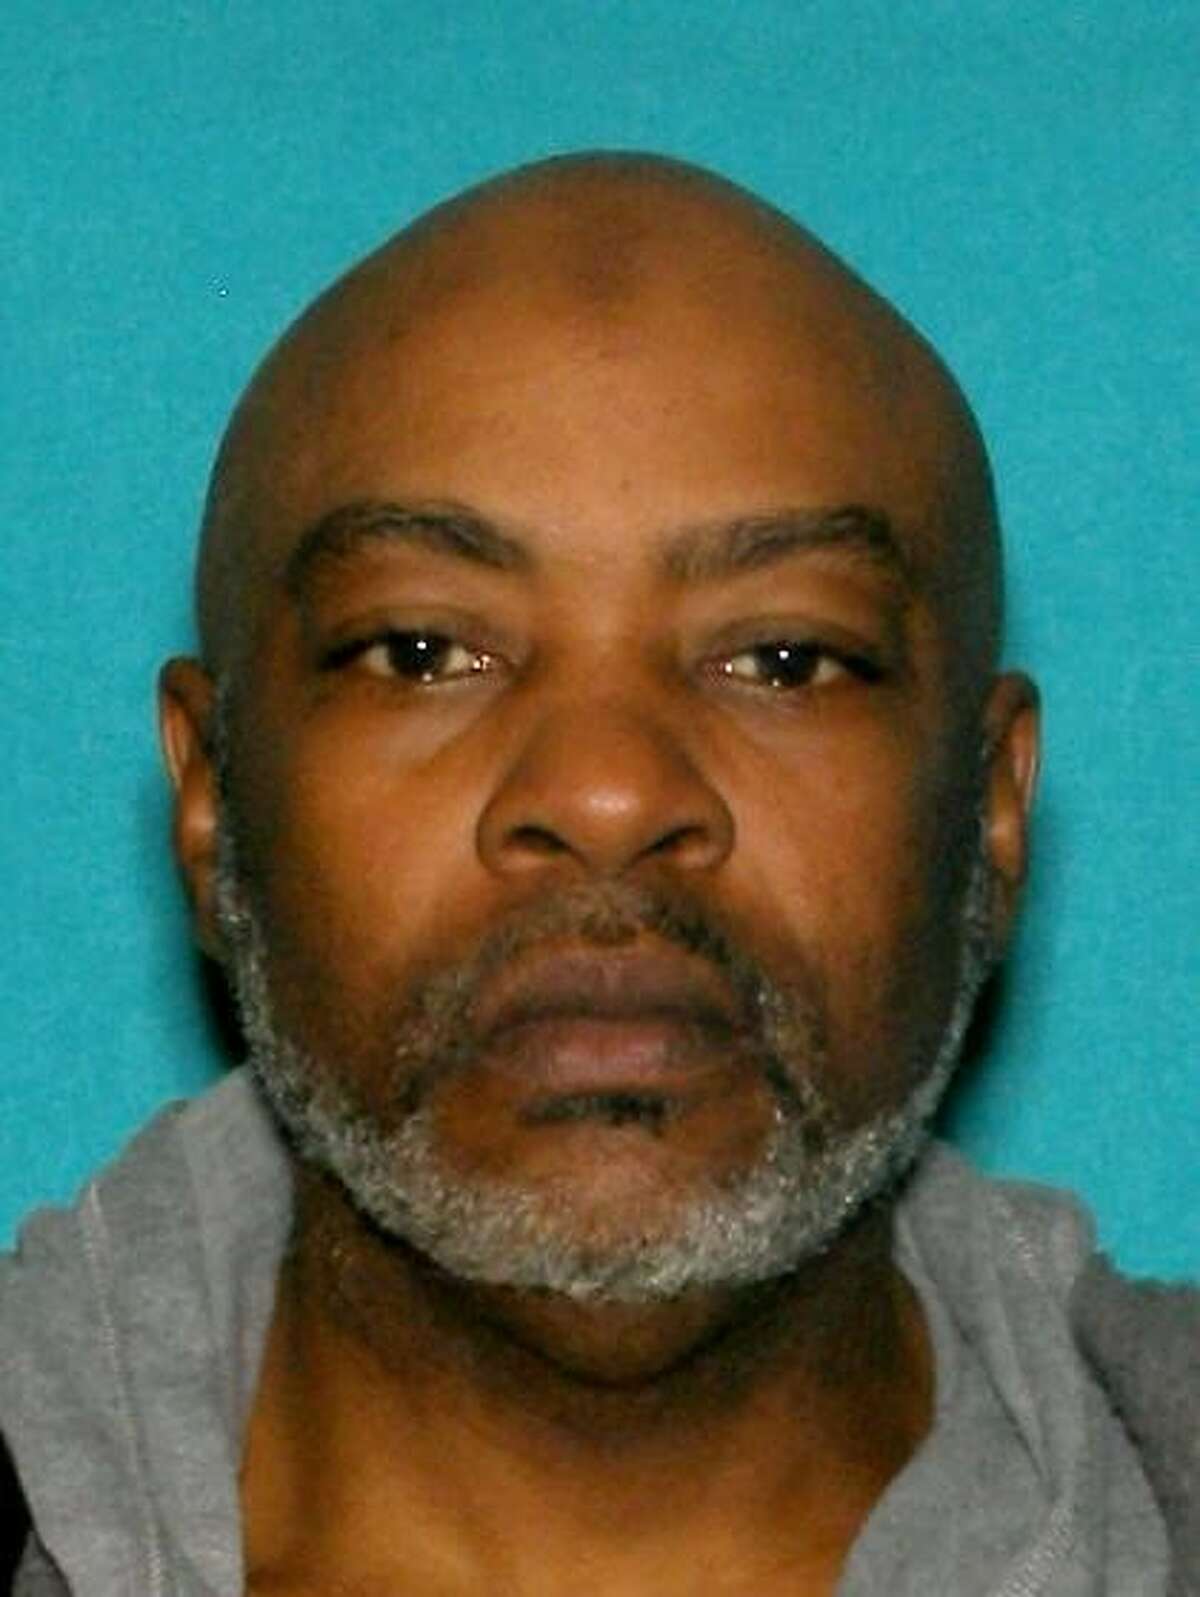 Lewis Bright, 47, is being sought by San Antonio police.